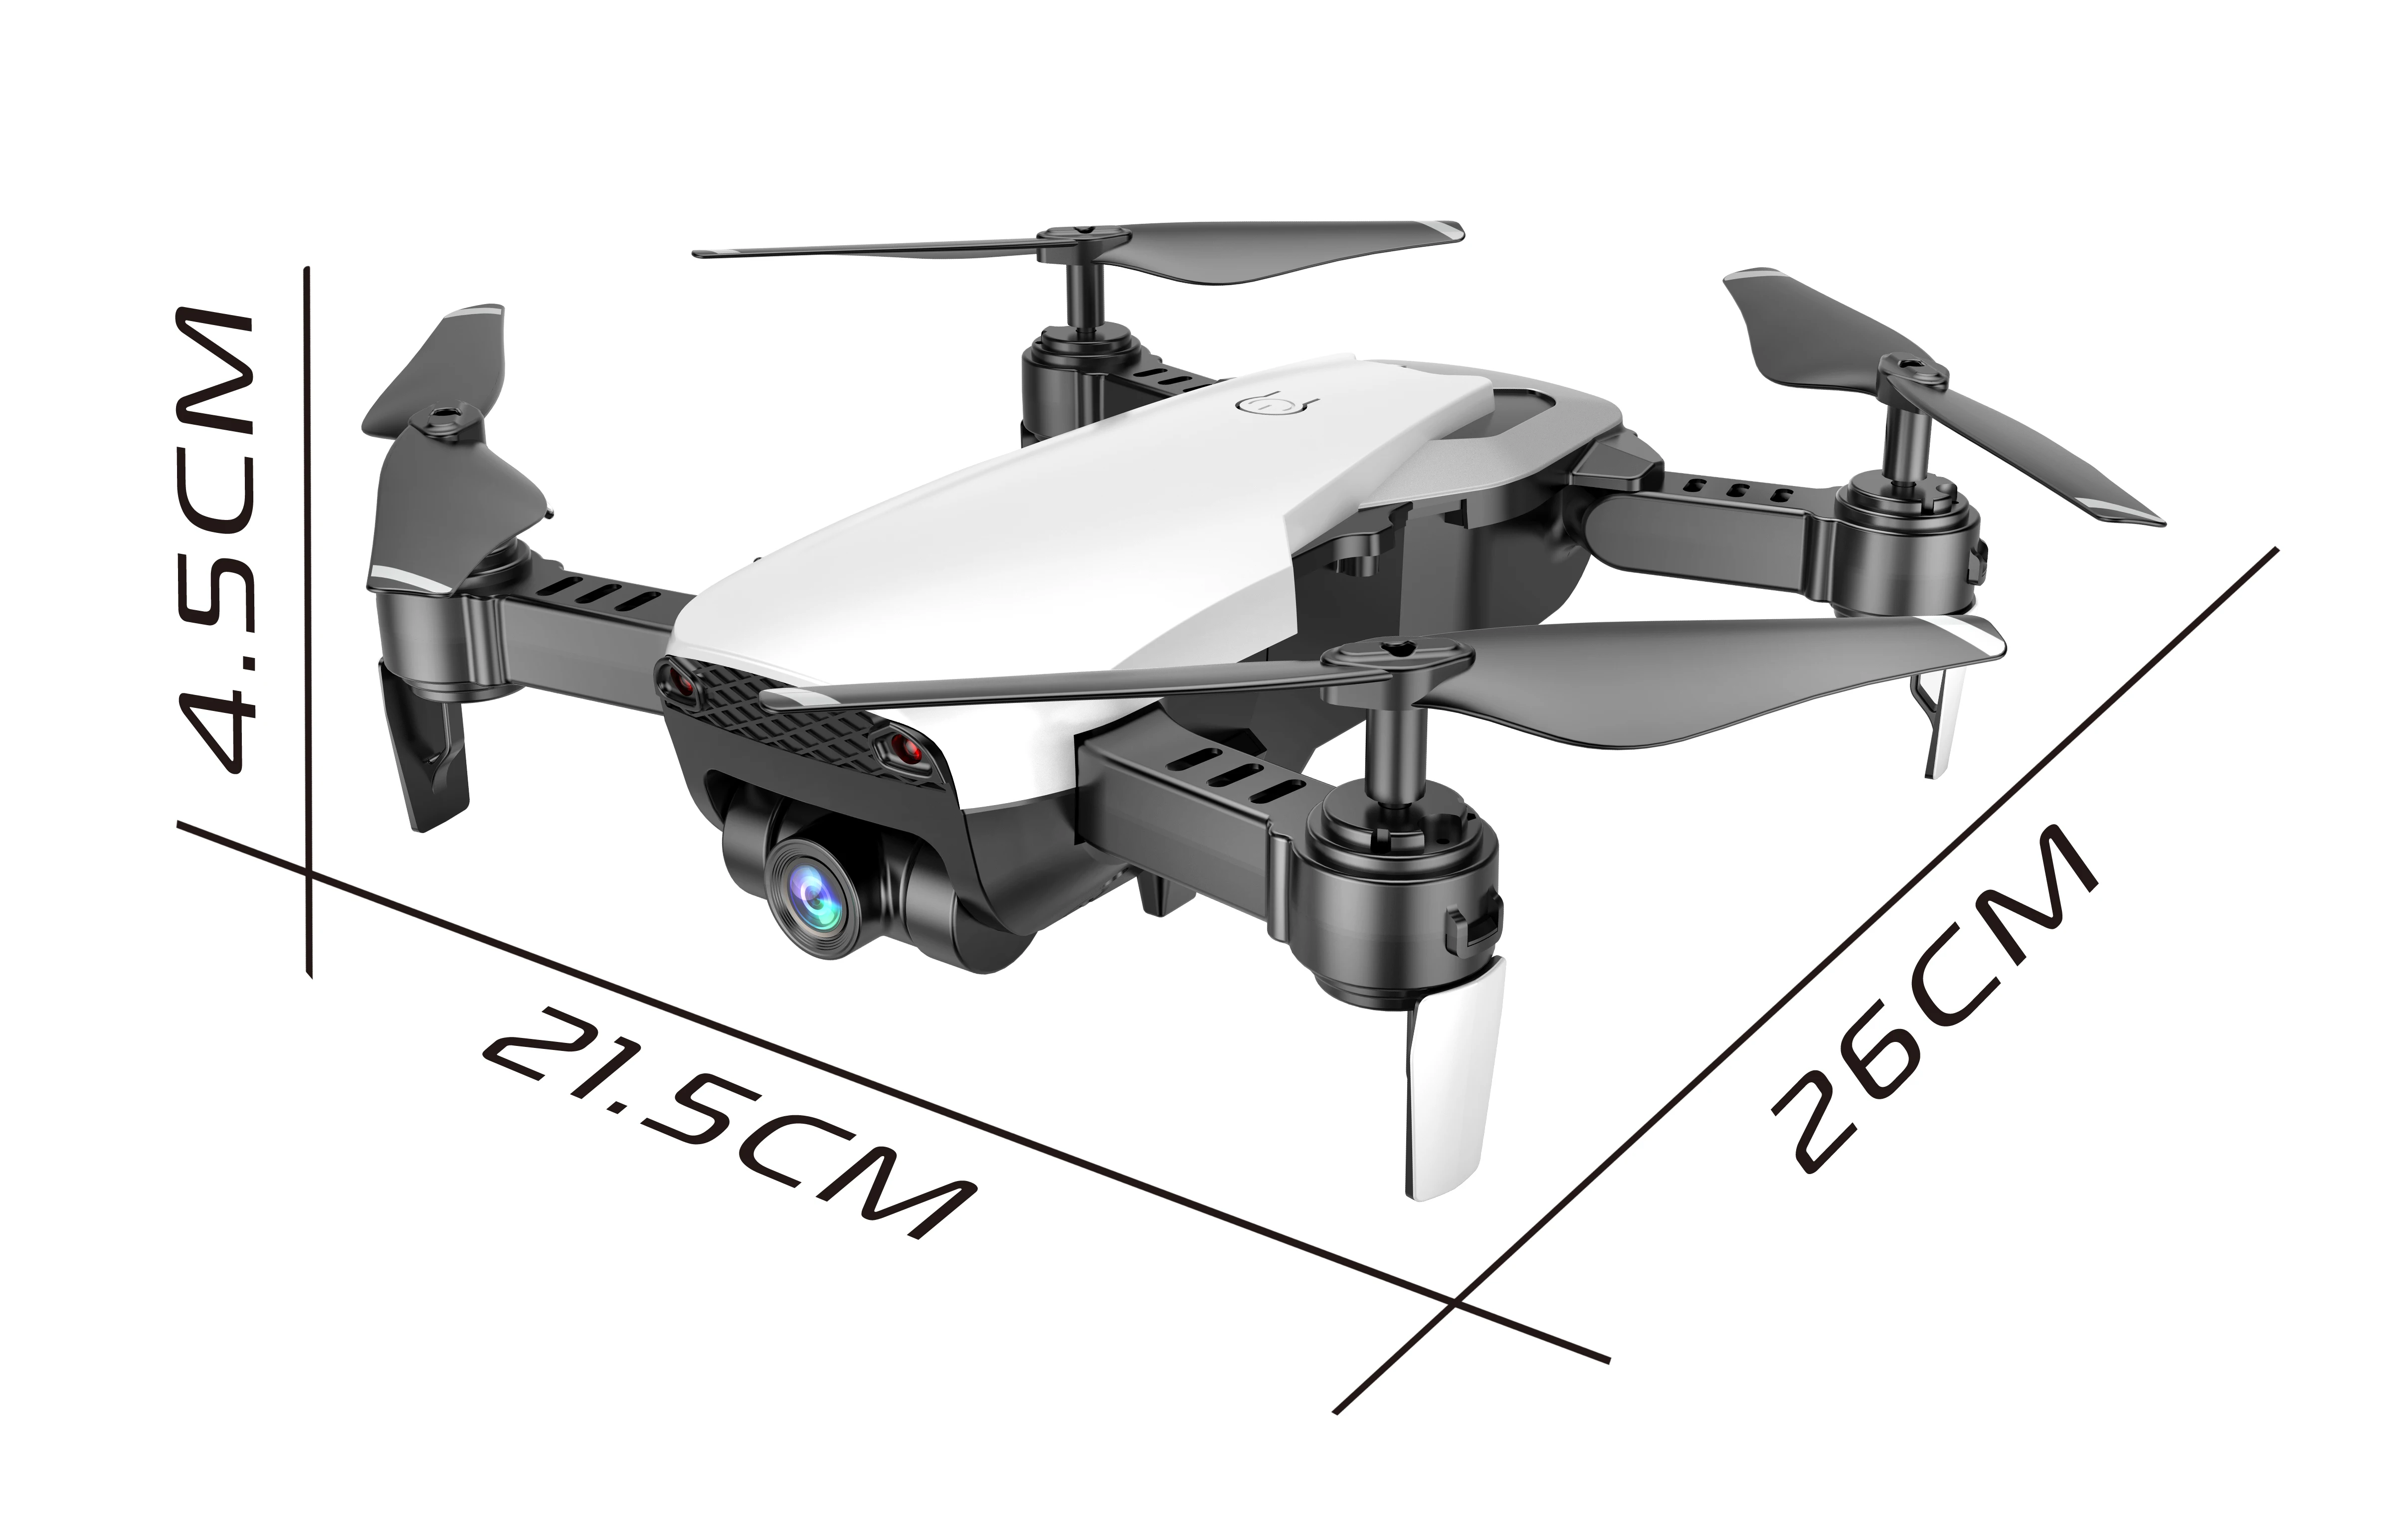 Wholesale Toysky S163 FPV Drone with 1080P Wide-angle WiFi HD Foldable RC Mini Helicopter XS809HW E58 X12 M69 Dron From m.alibaba.com